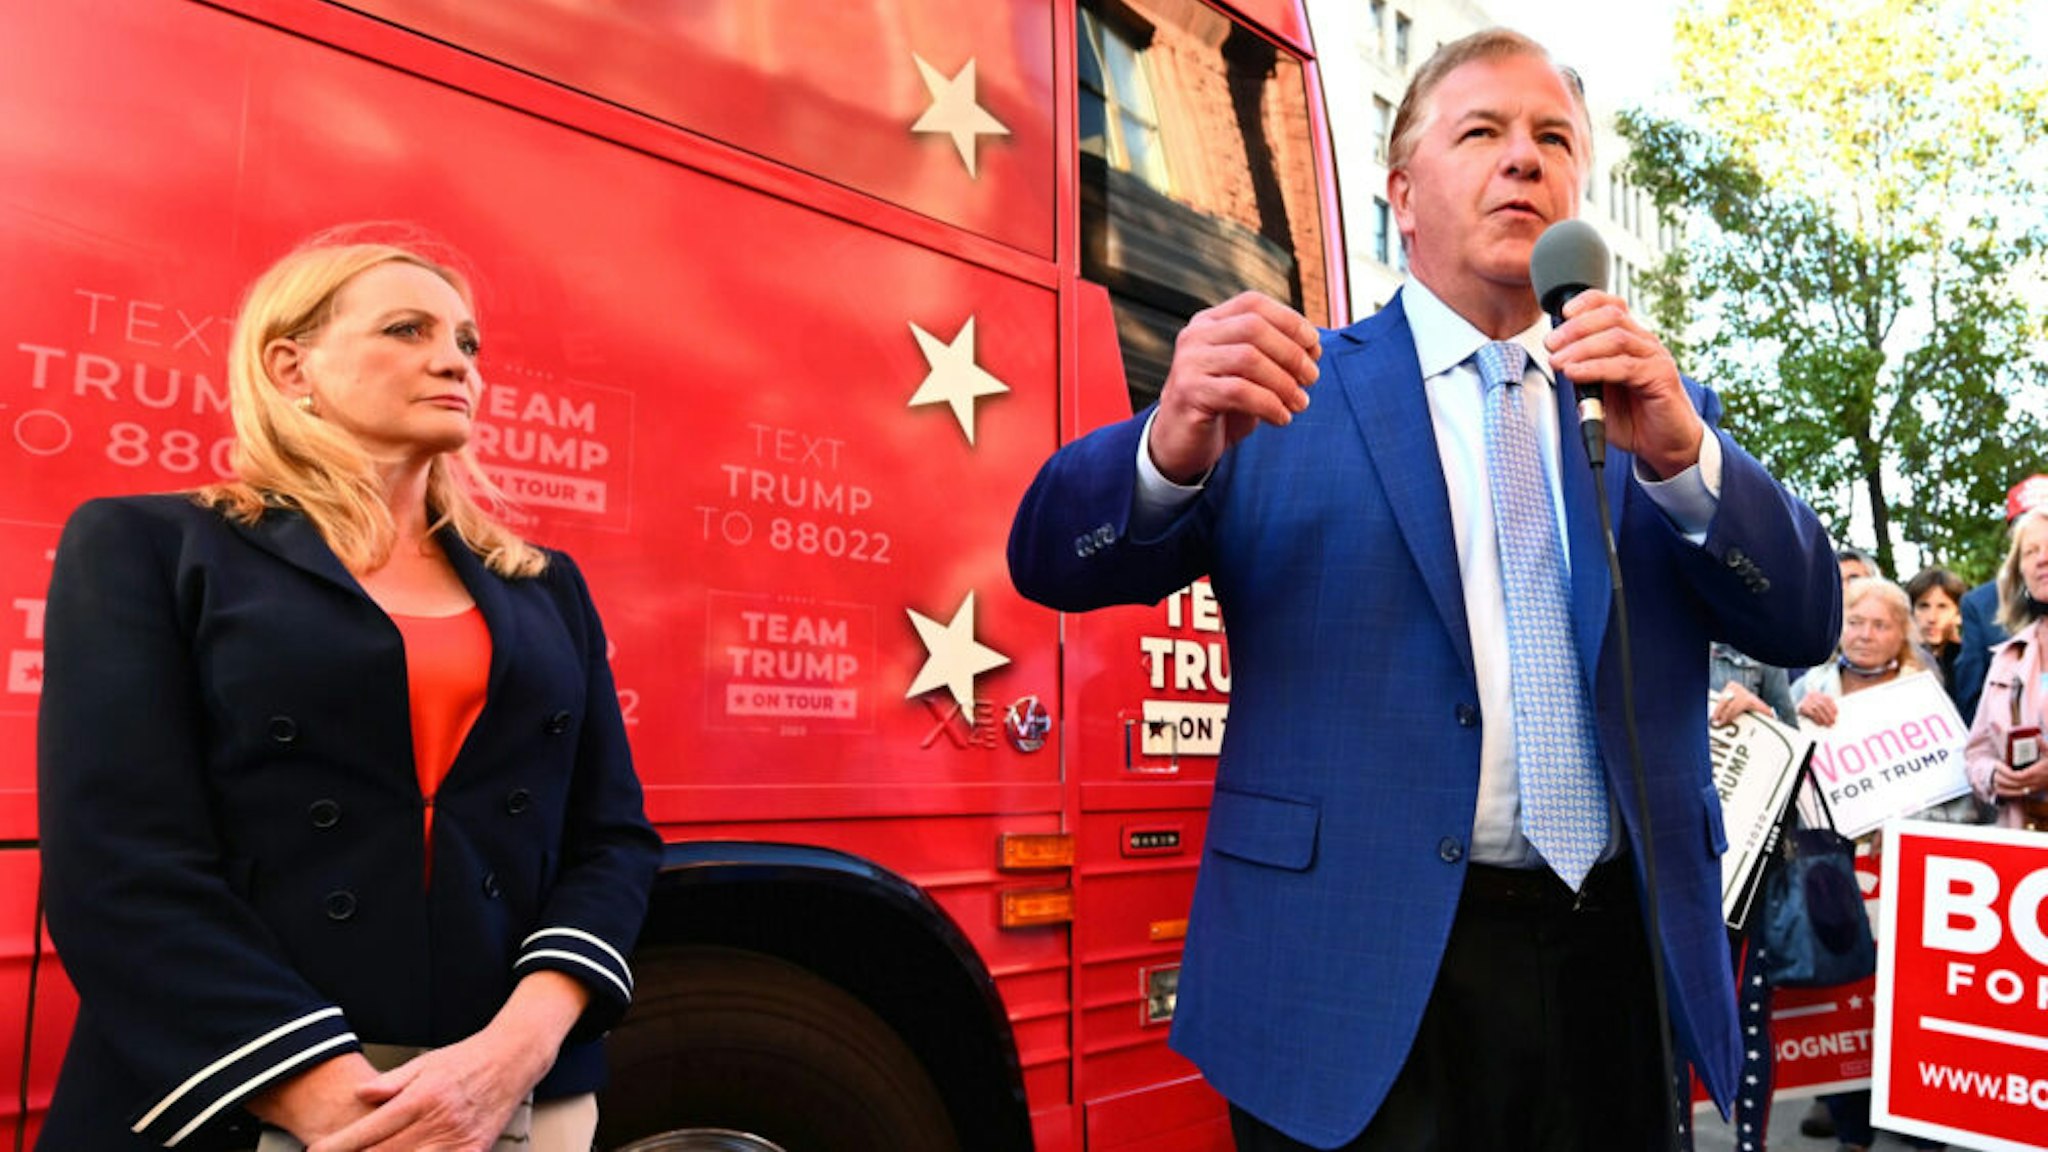 Republican celebrities Mark and Patricia McCloskey visit the republican HQ with Team Trump Bus on September 30, 2020 in Scranton, Pennsylvania.